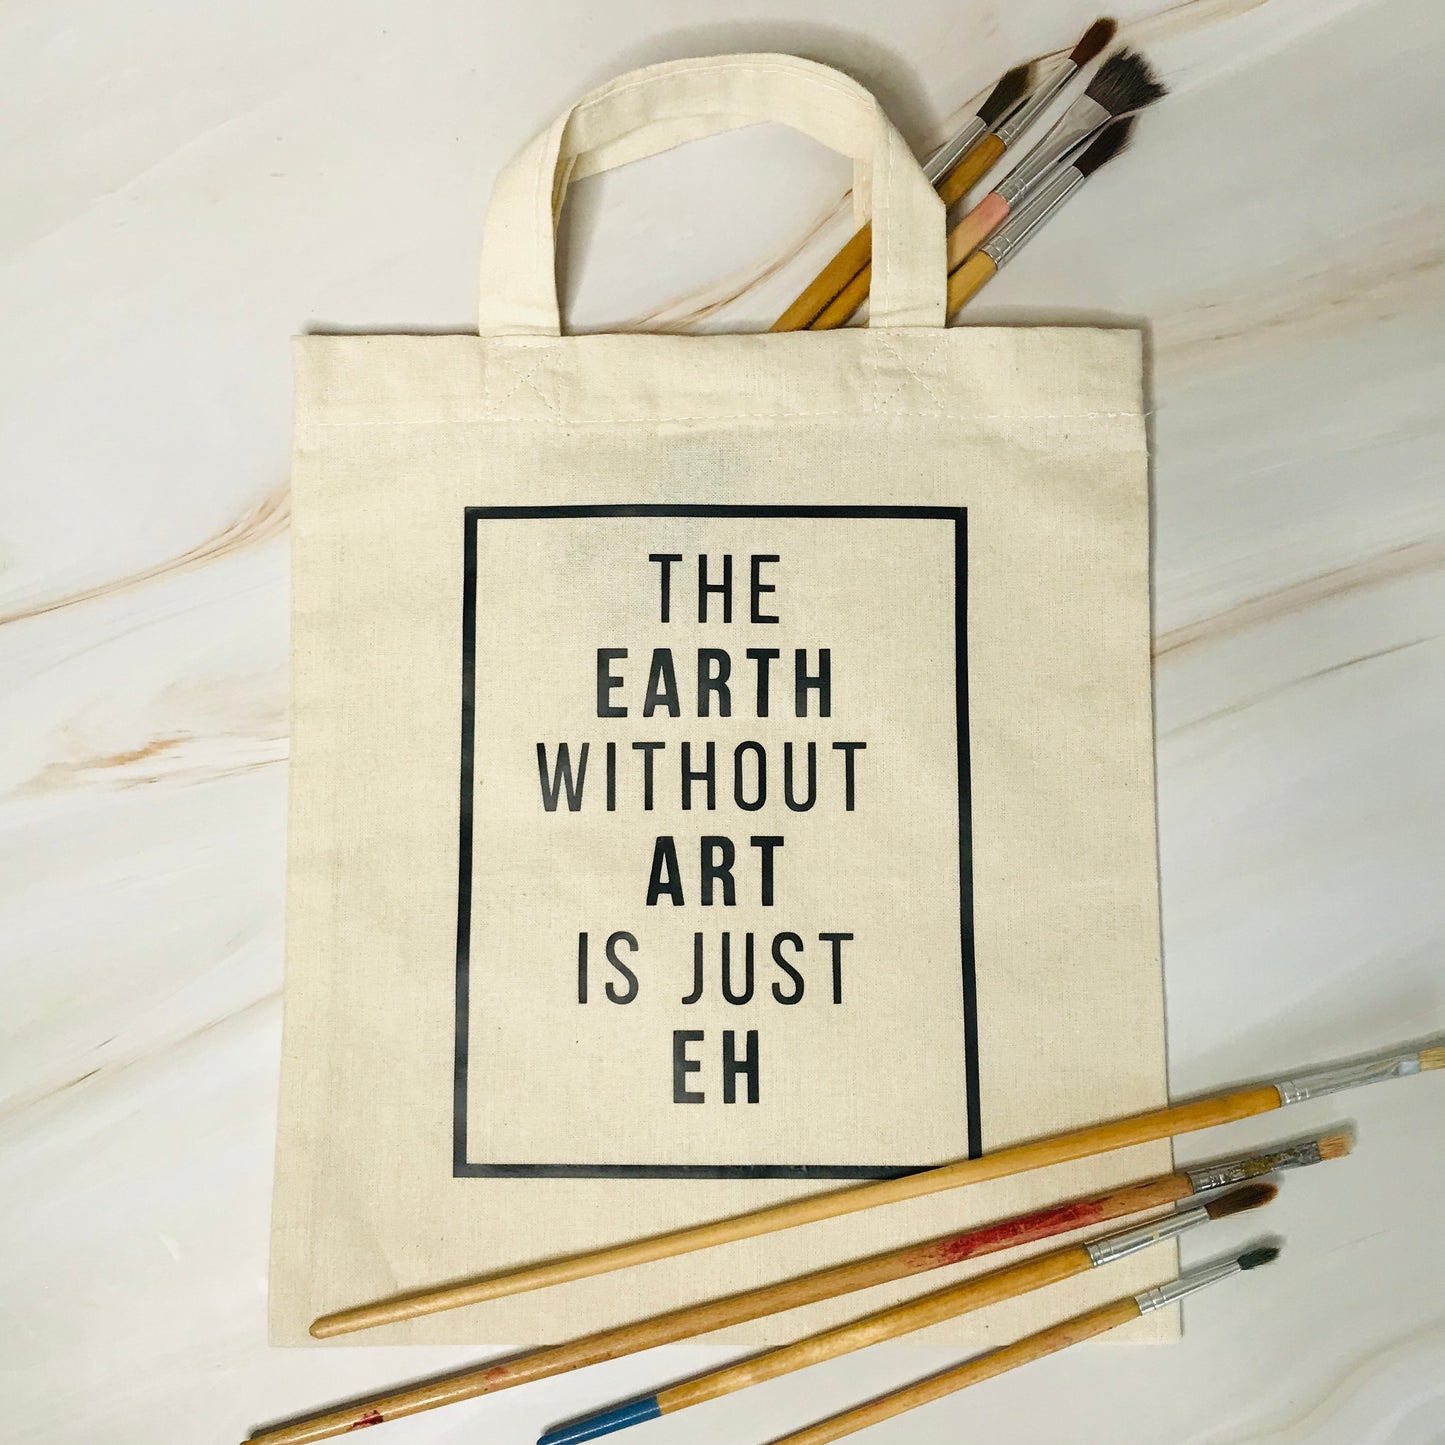 Mini Canvas & Easel With Fabric EARTH WITHOUT ART Mini Art Bag